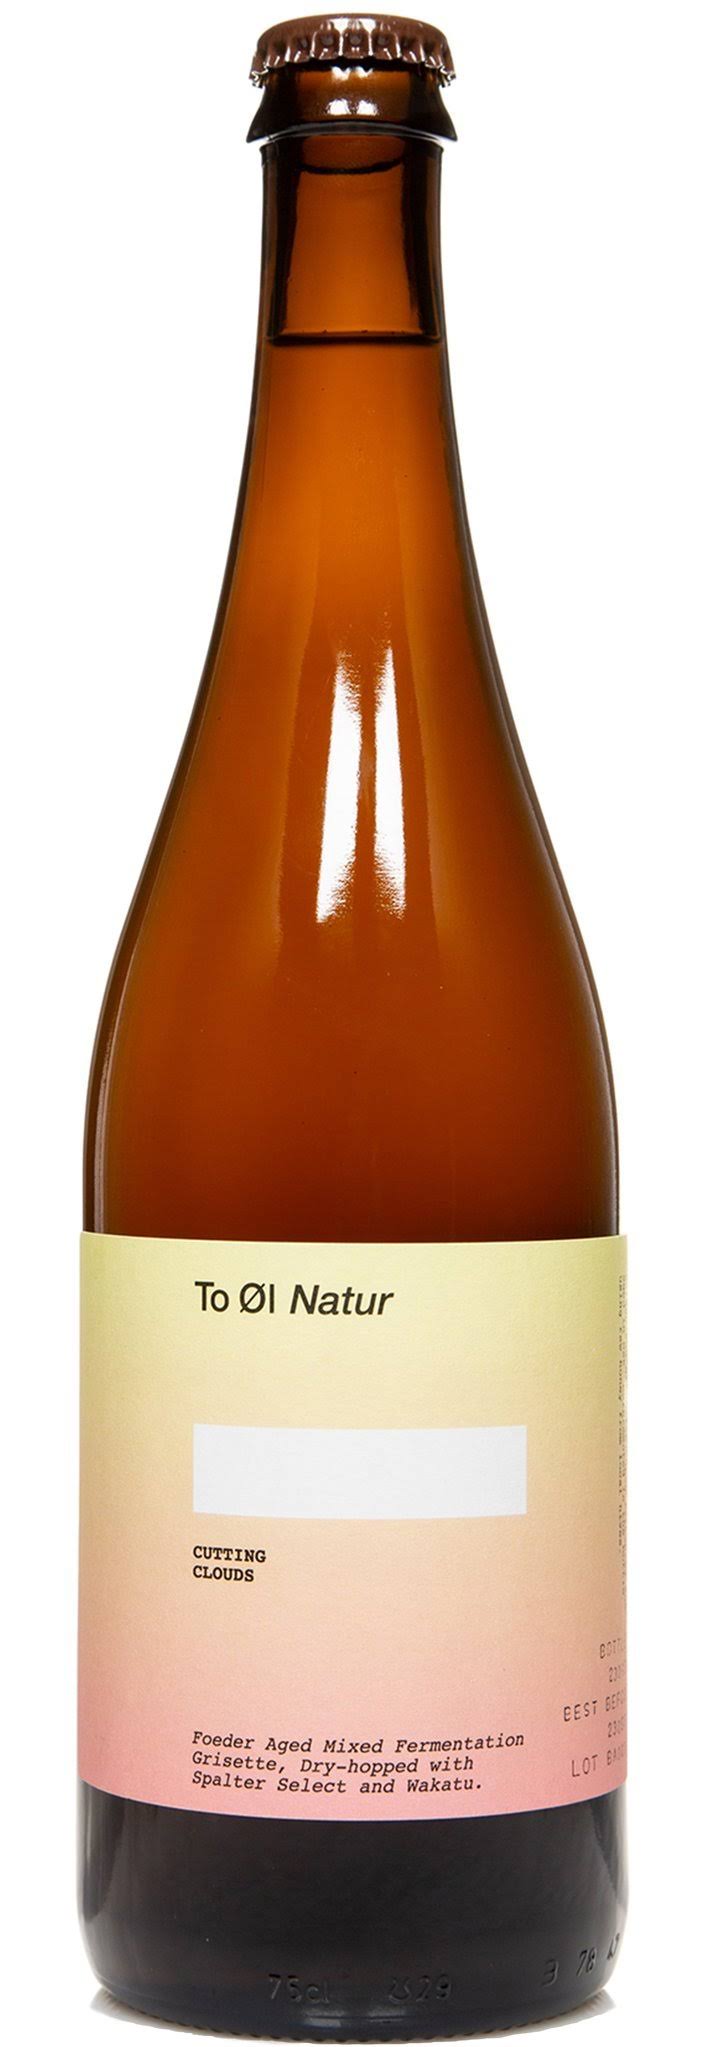 To Ol Natur Cutting Clouds 75cl Bottle (Sharing Bottle)